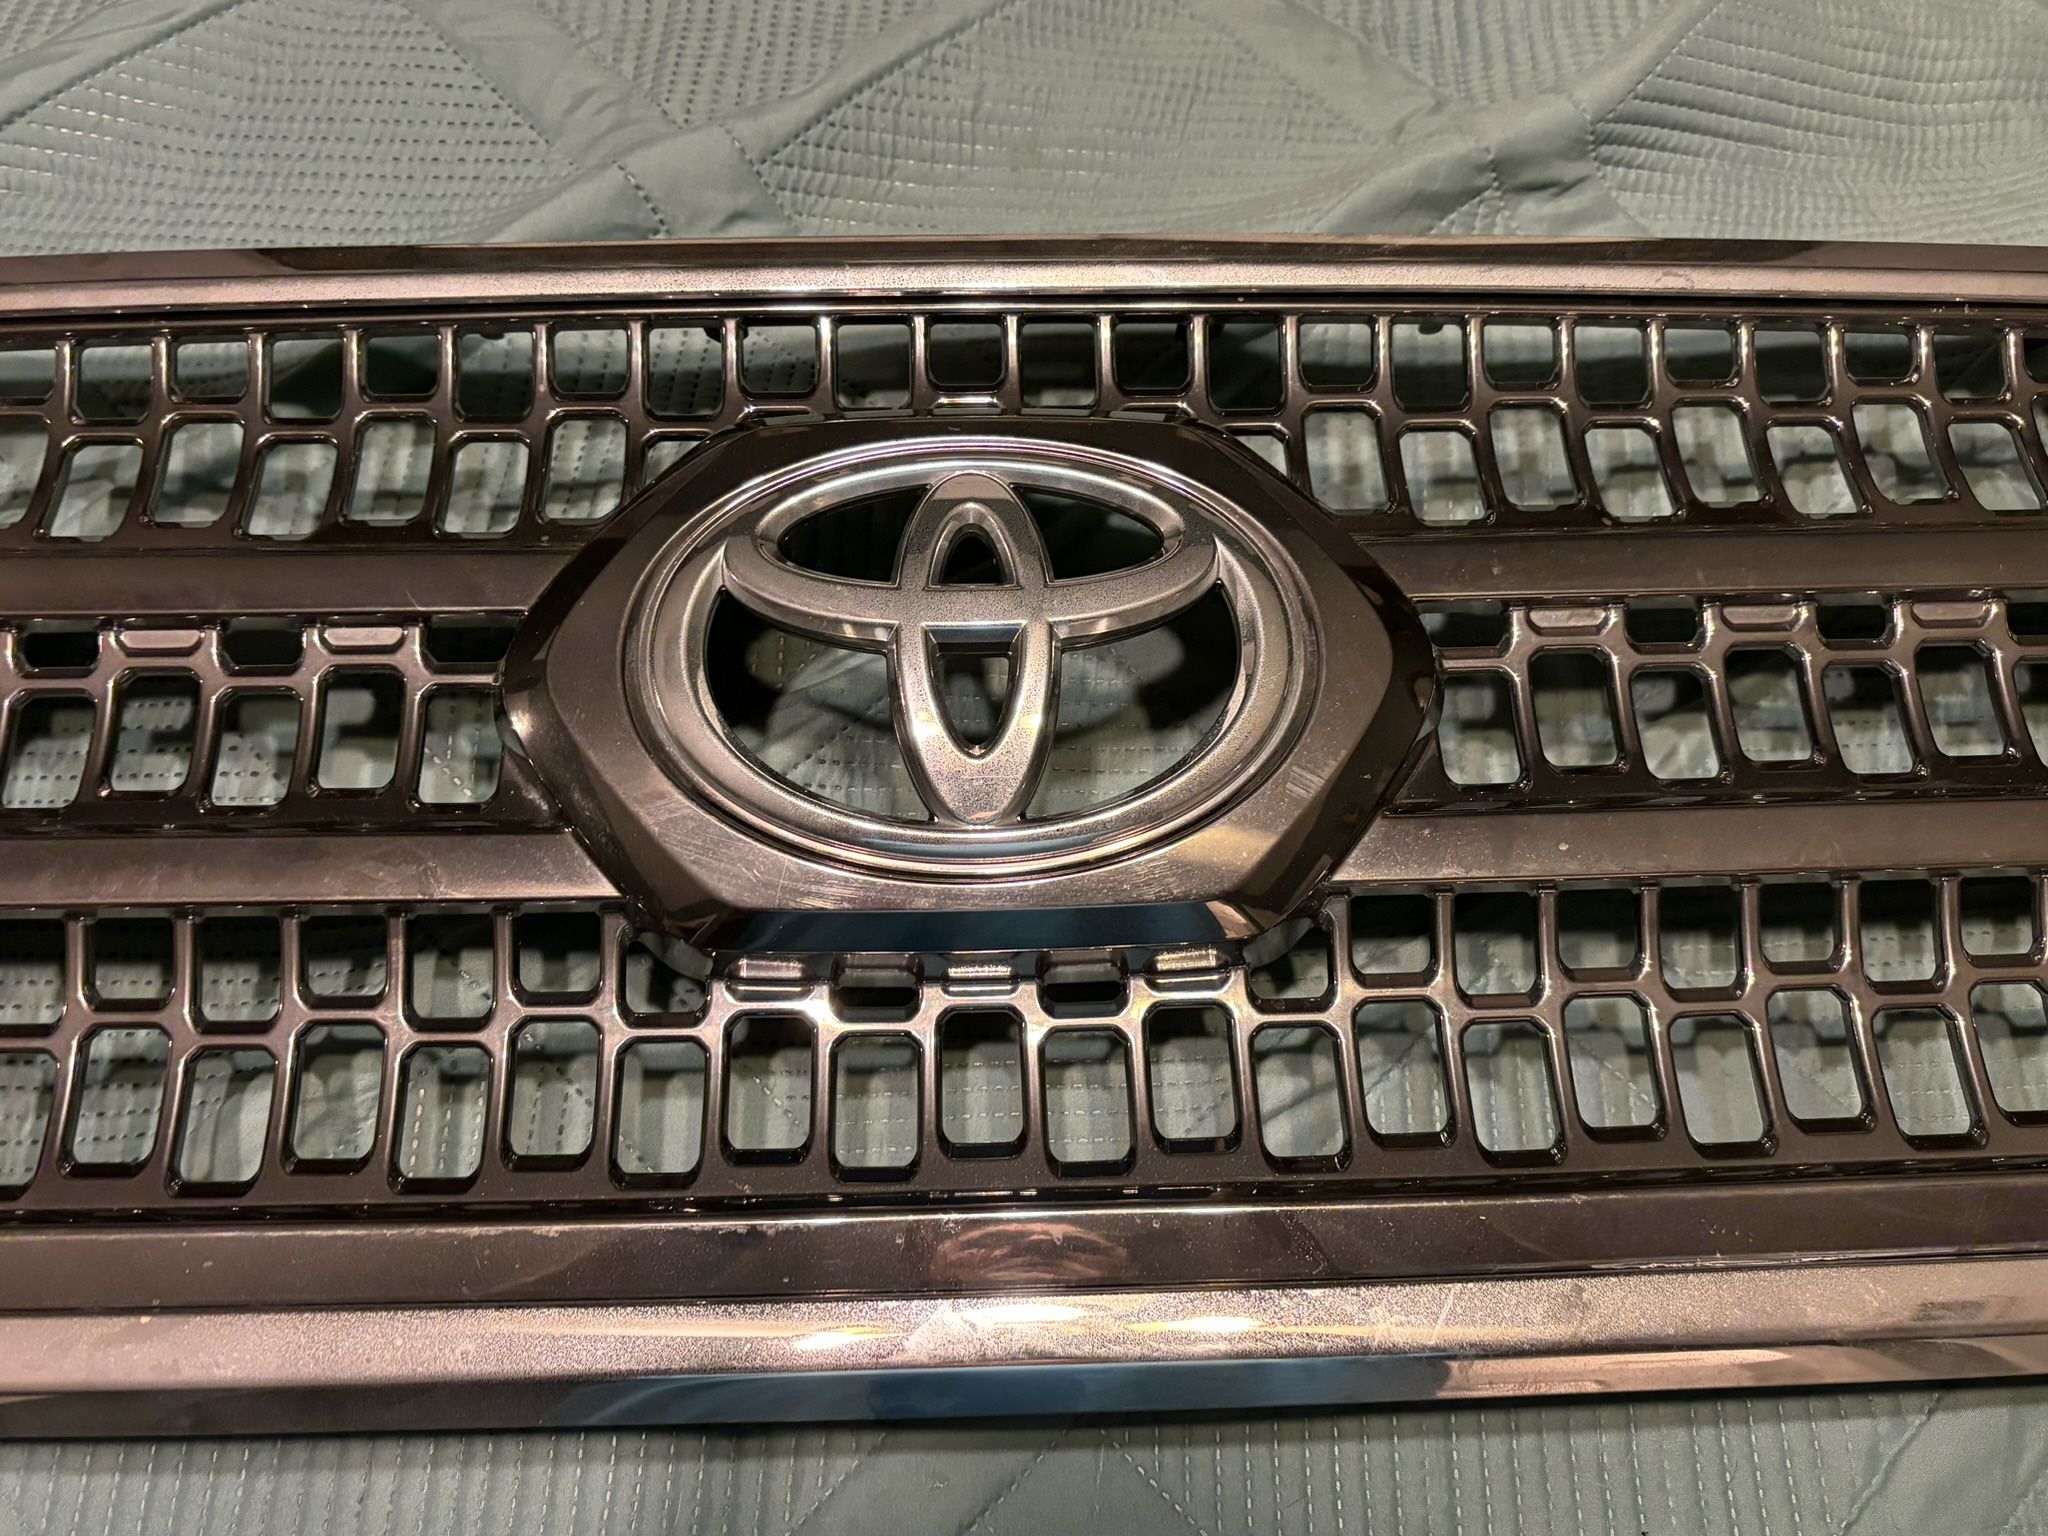 2017 Toyota Tacoma Factory Grill